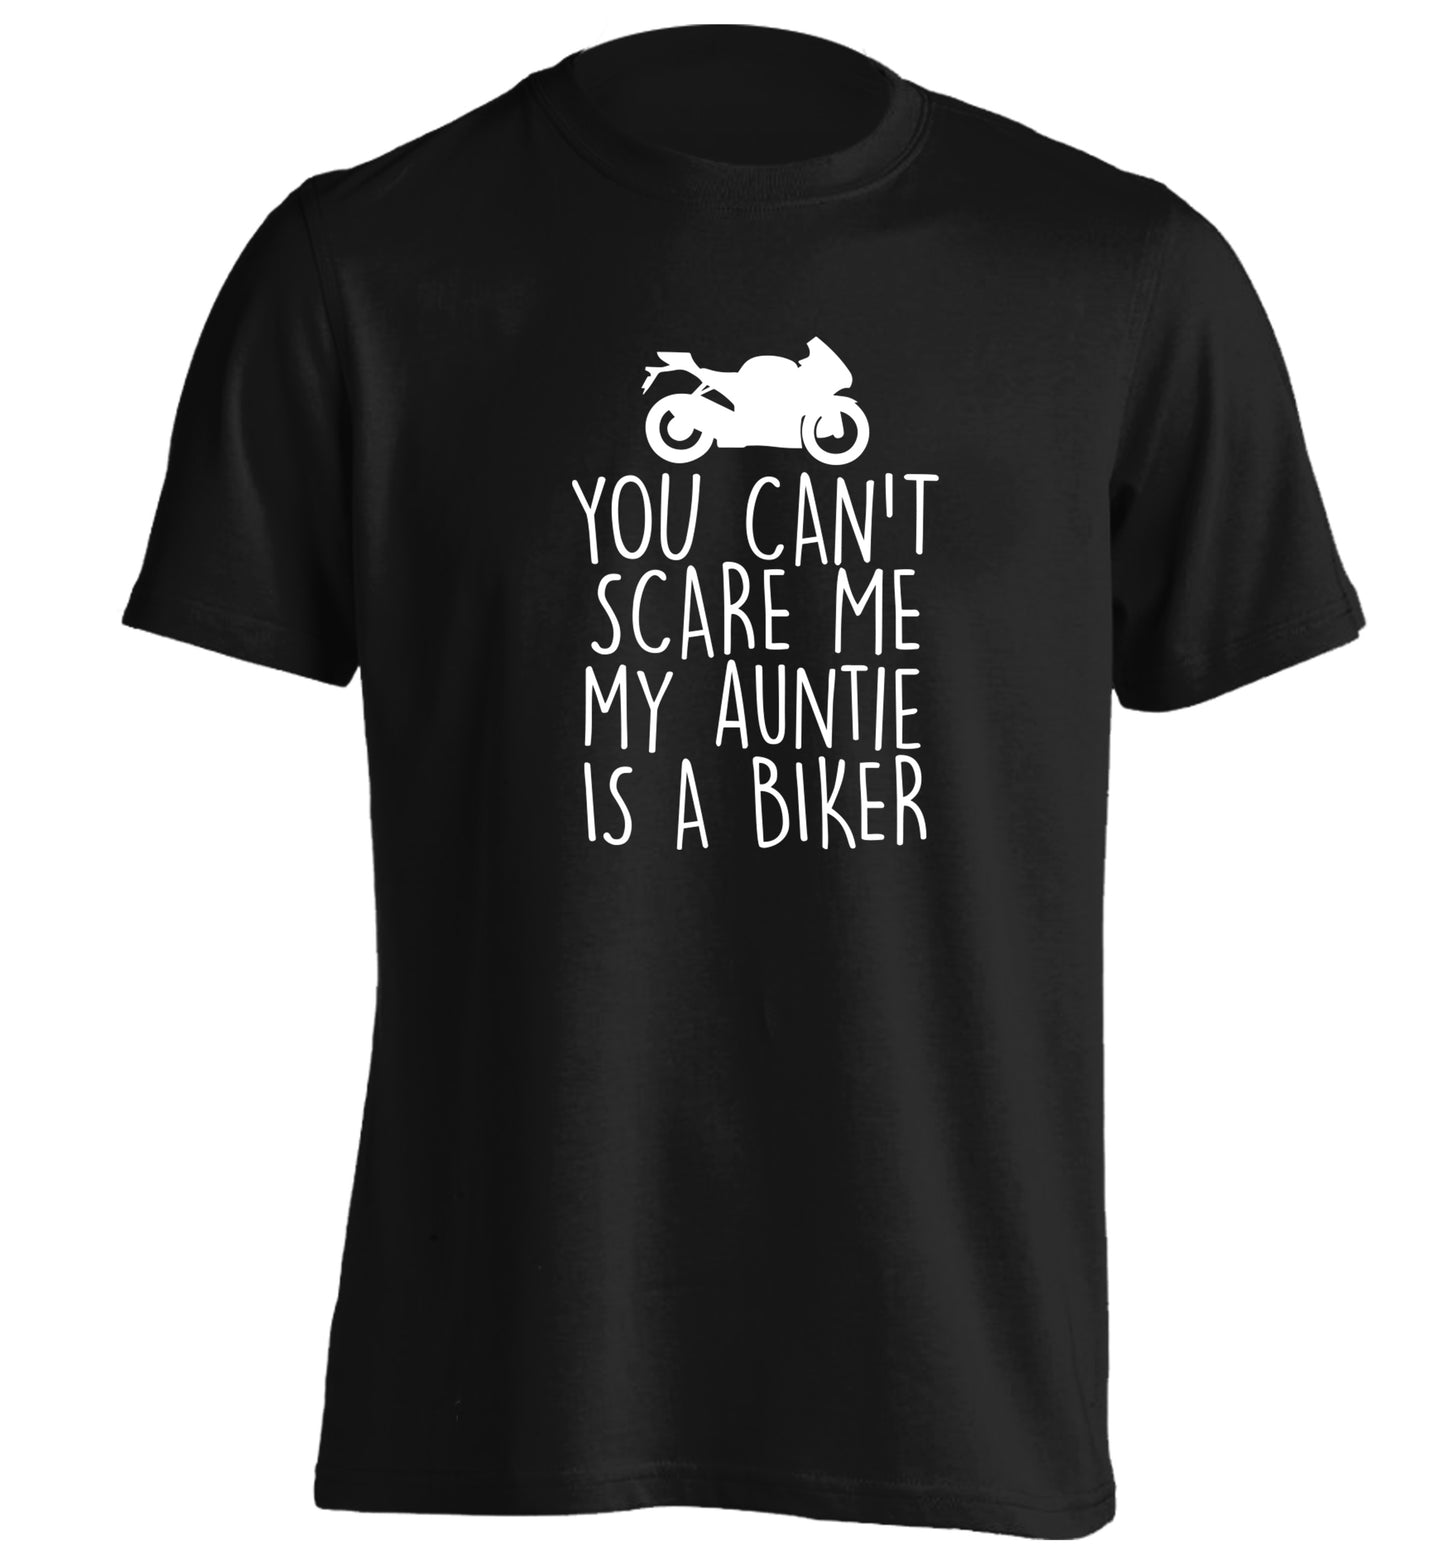 You can't scare me my auntie is a biker adults unisex black Tshirt 2XL